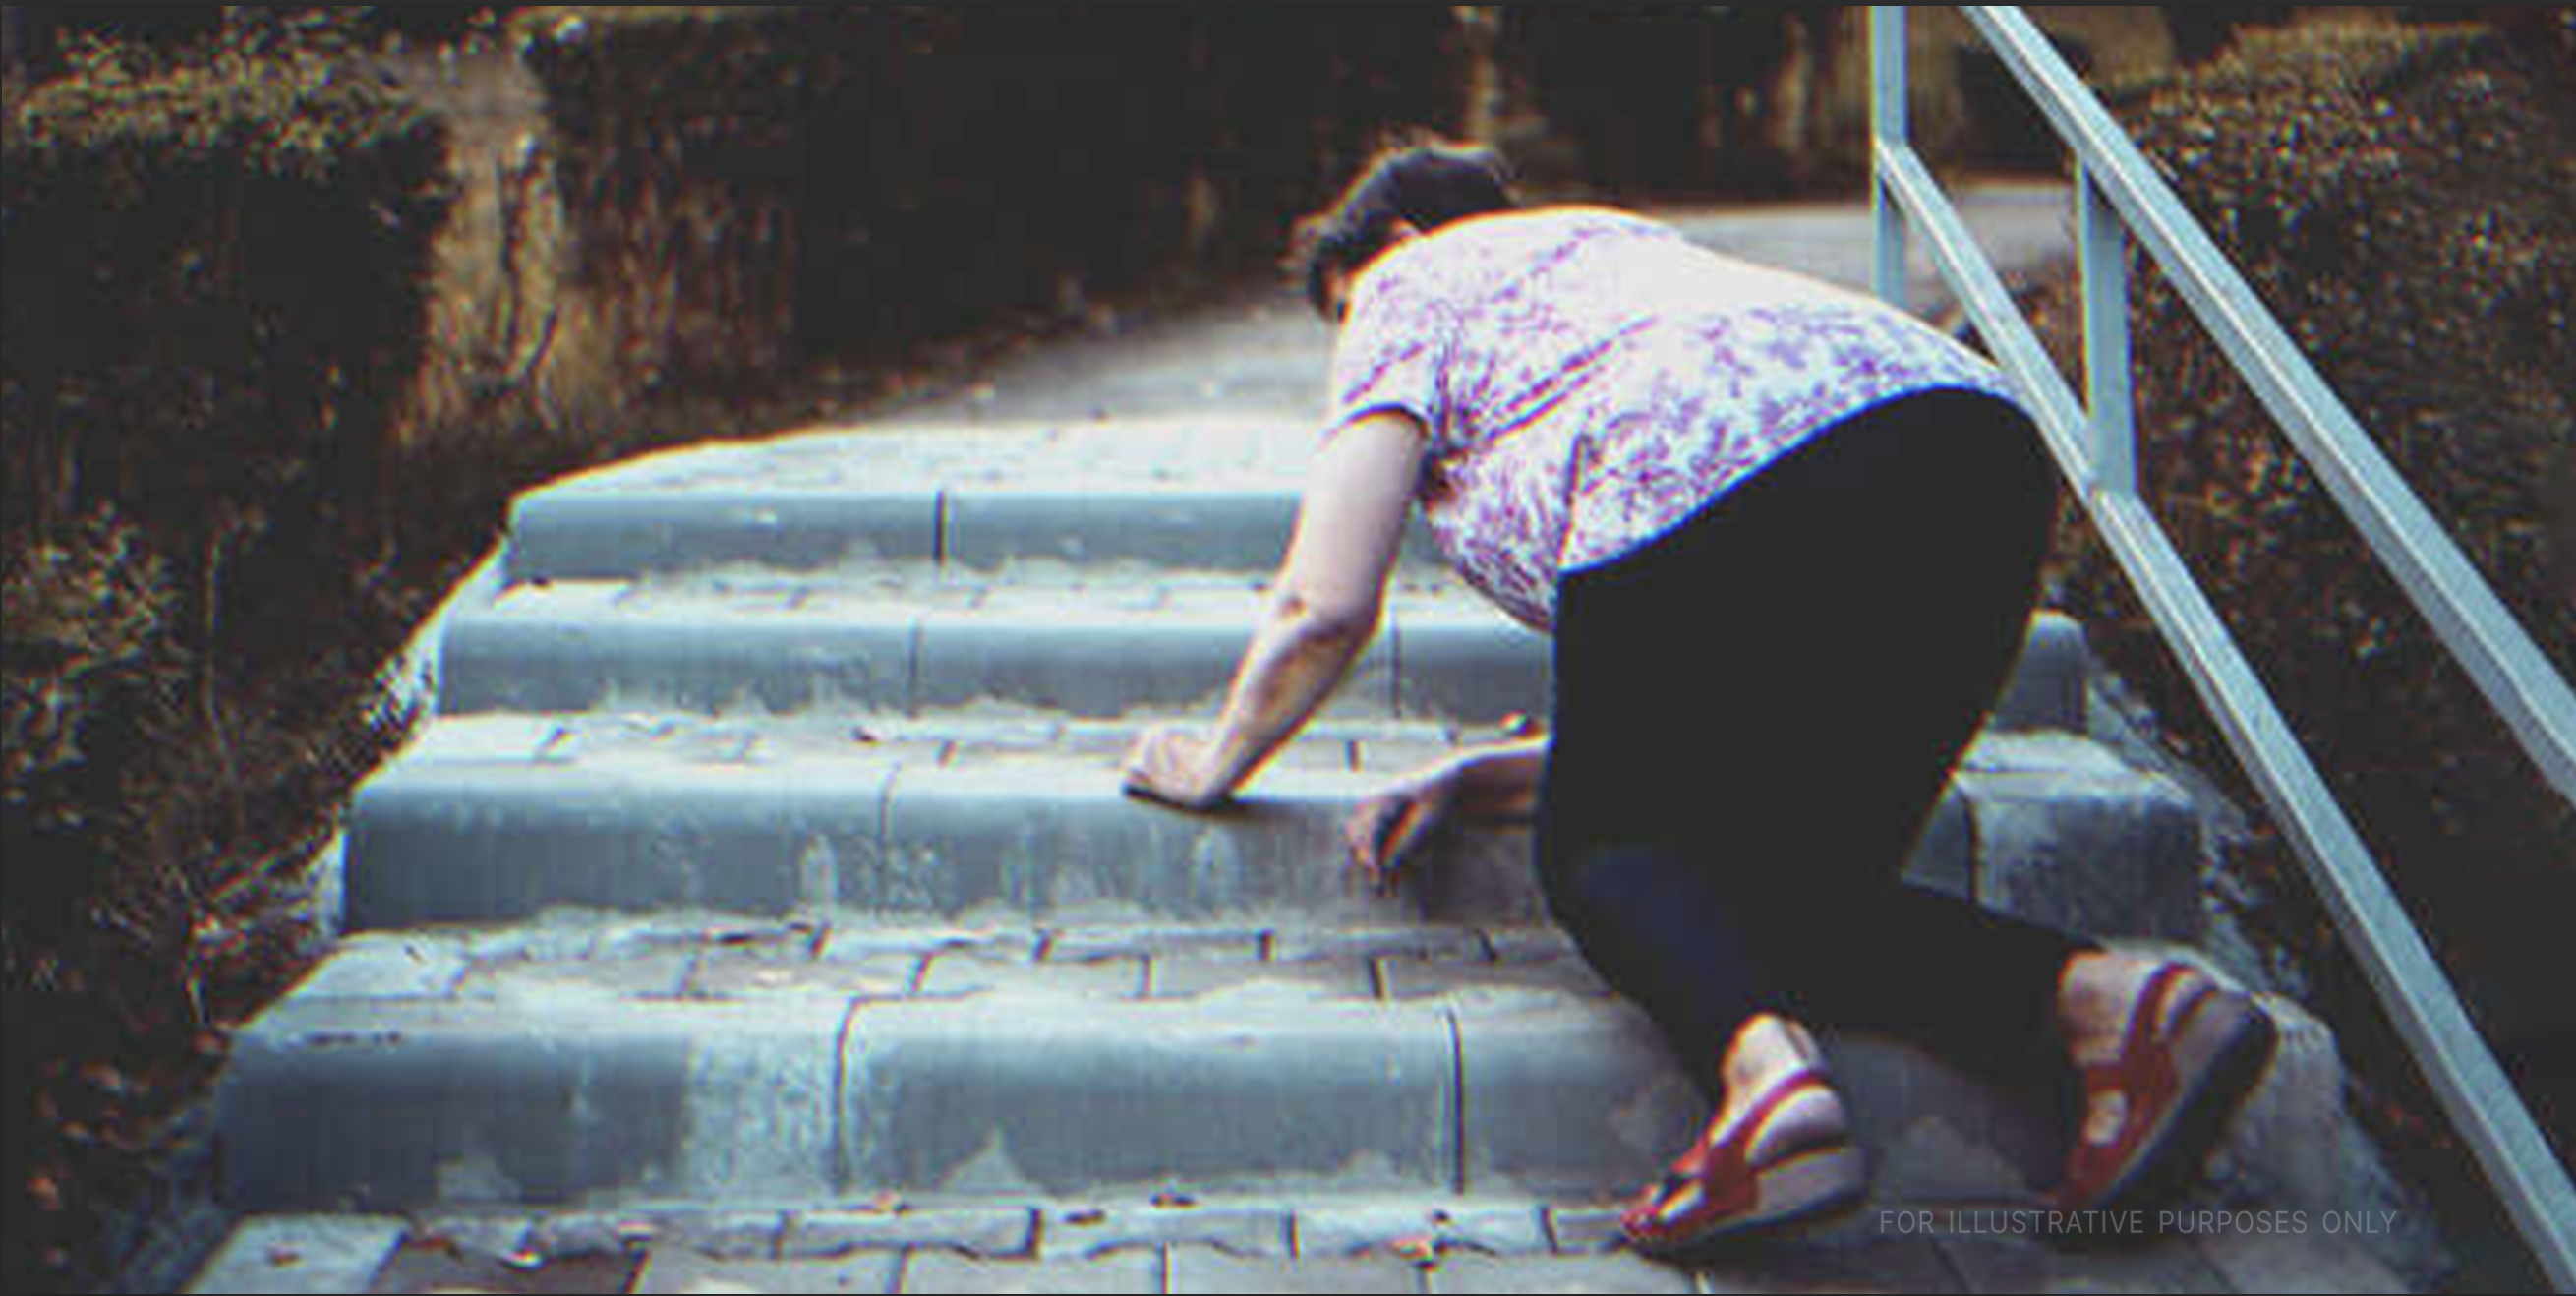 A woman fell down the stairs | Source: Shutterstock